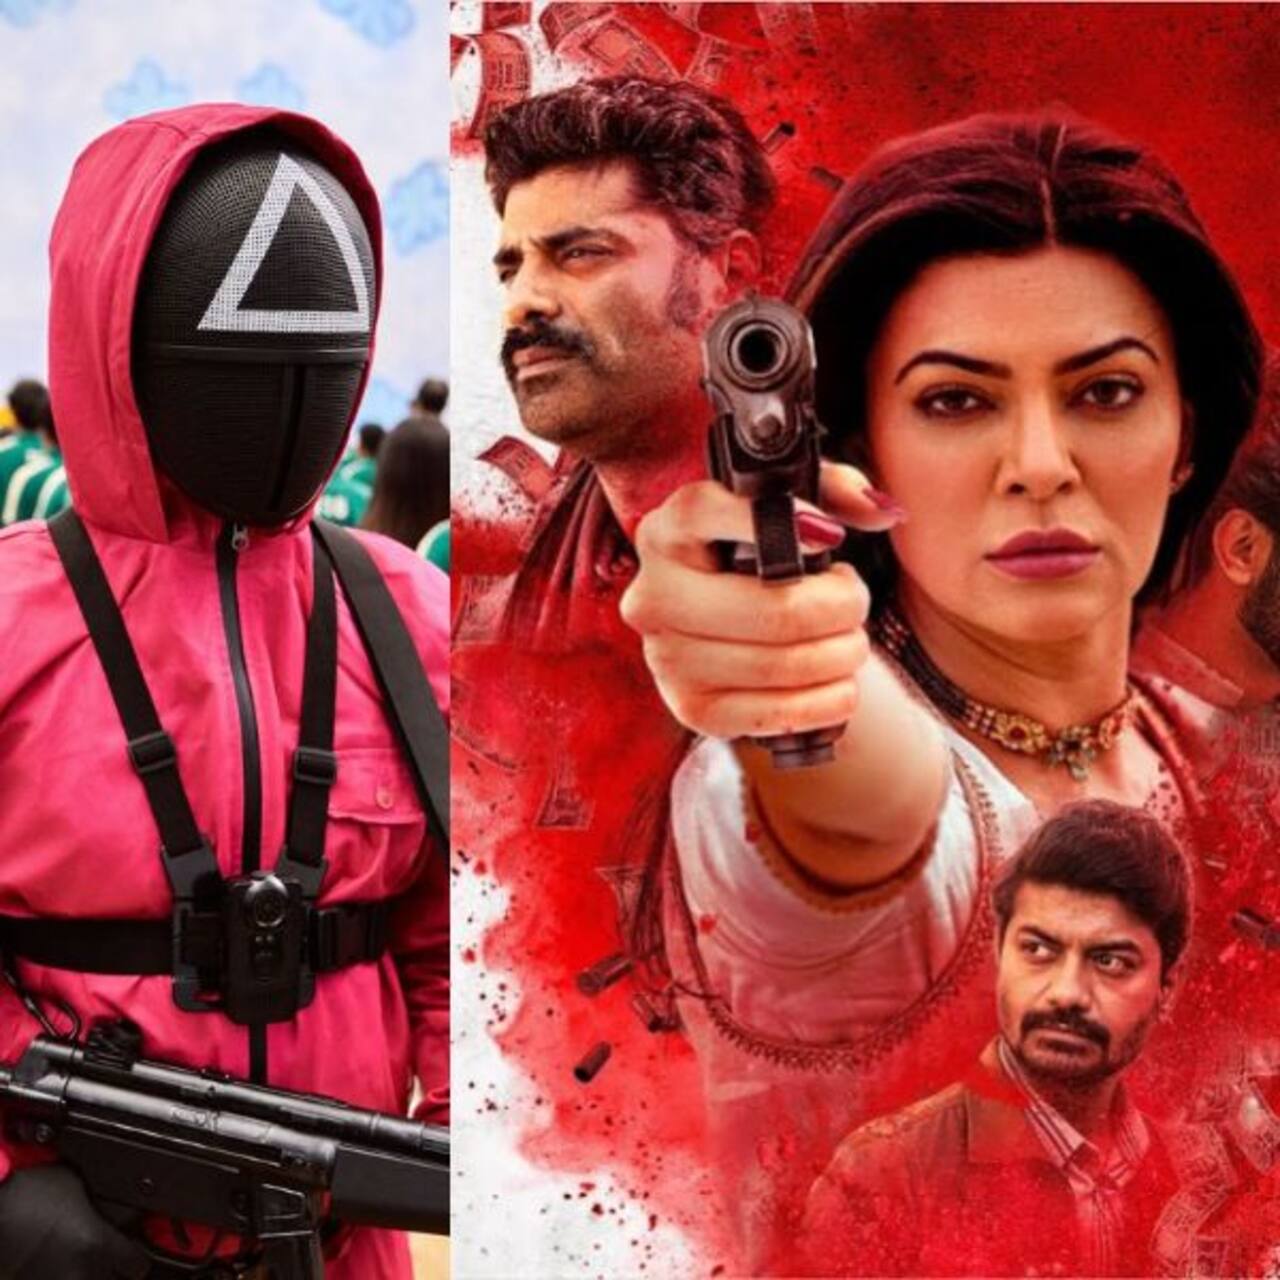 Trending OTT news today: Netflix's Squid Game achieves new record, Sushmita Sen's Aarya 2 receives rave reviews and more